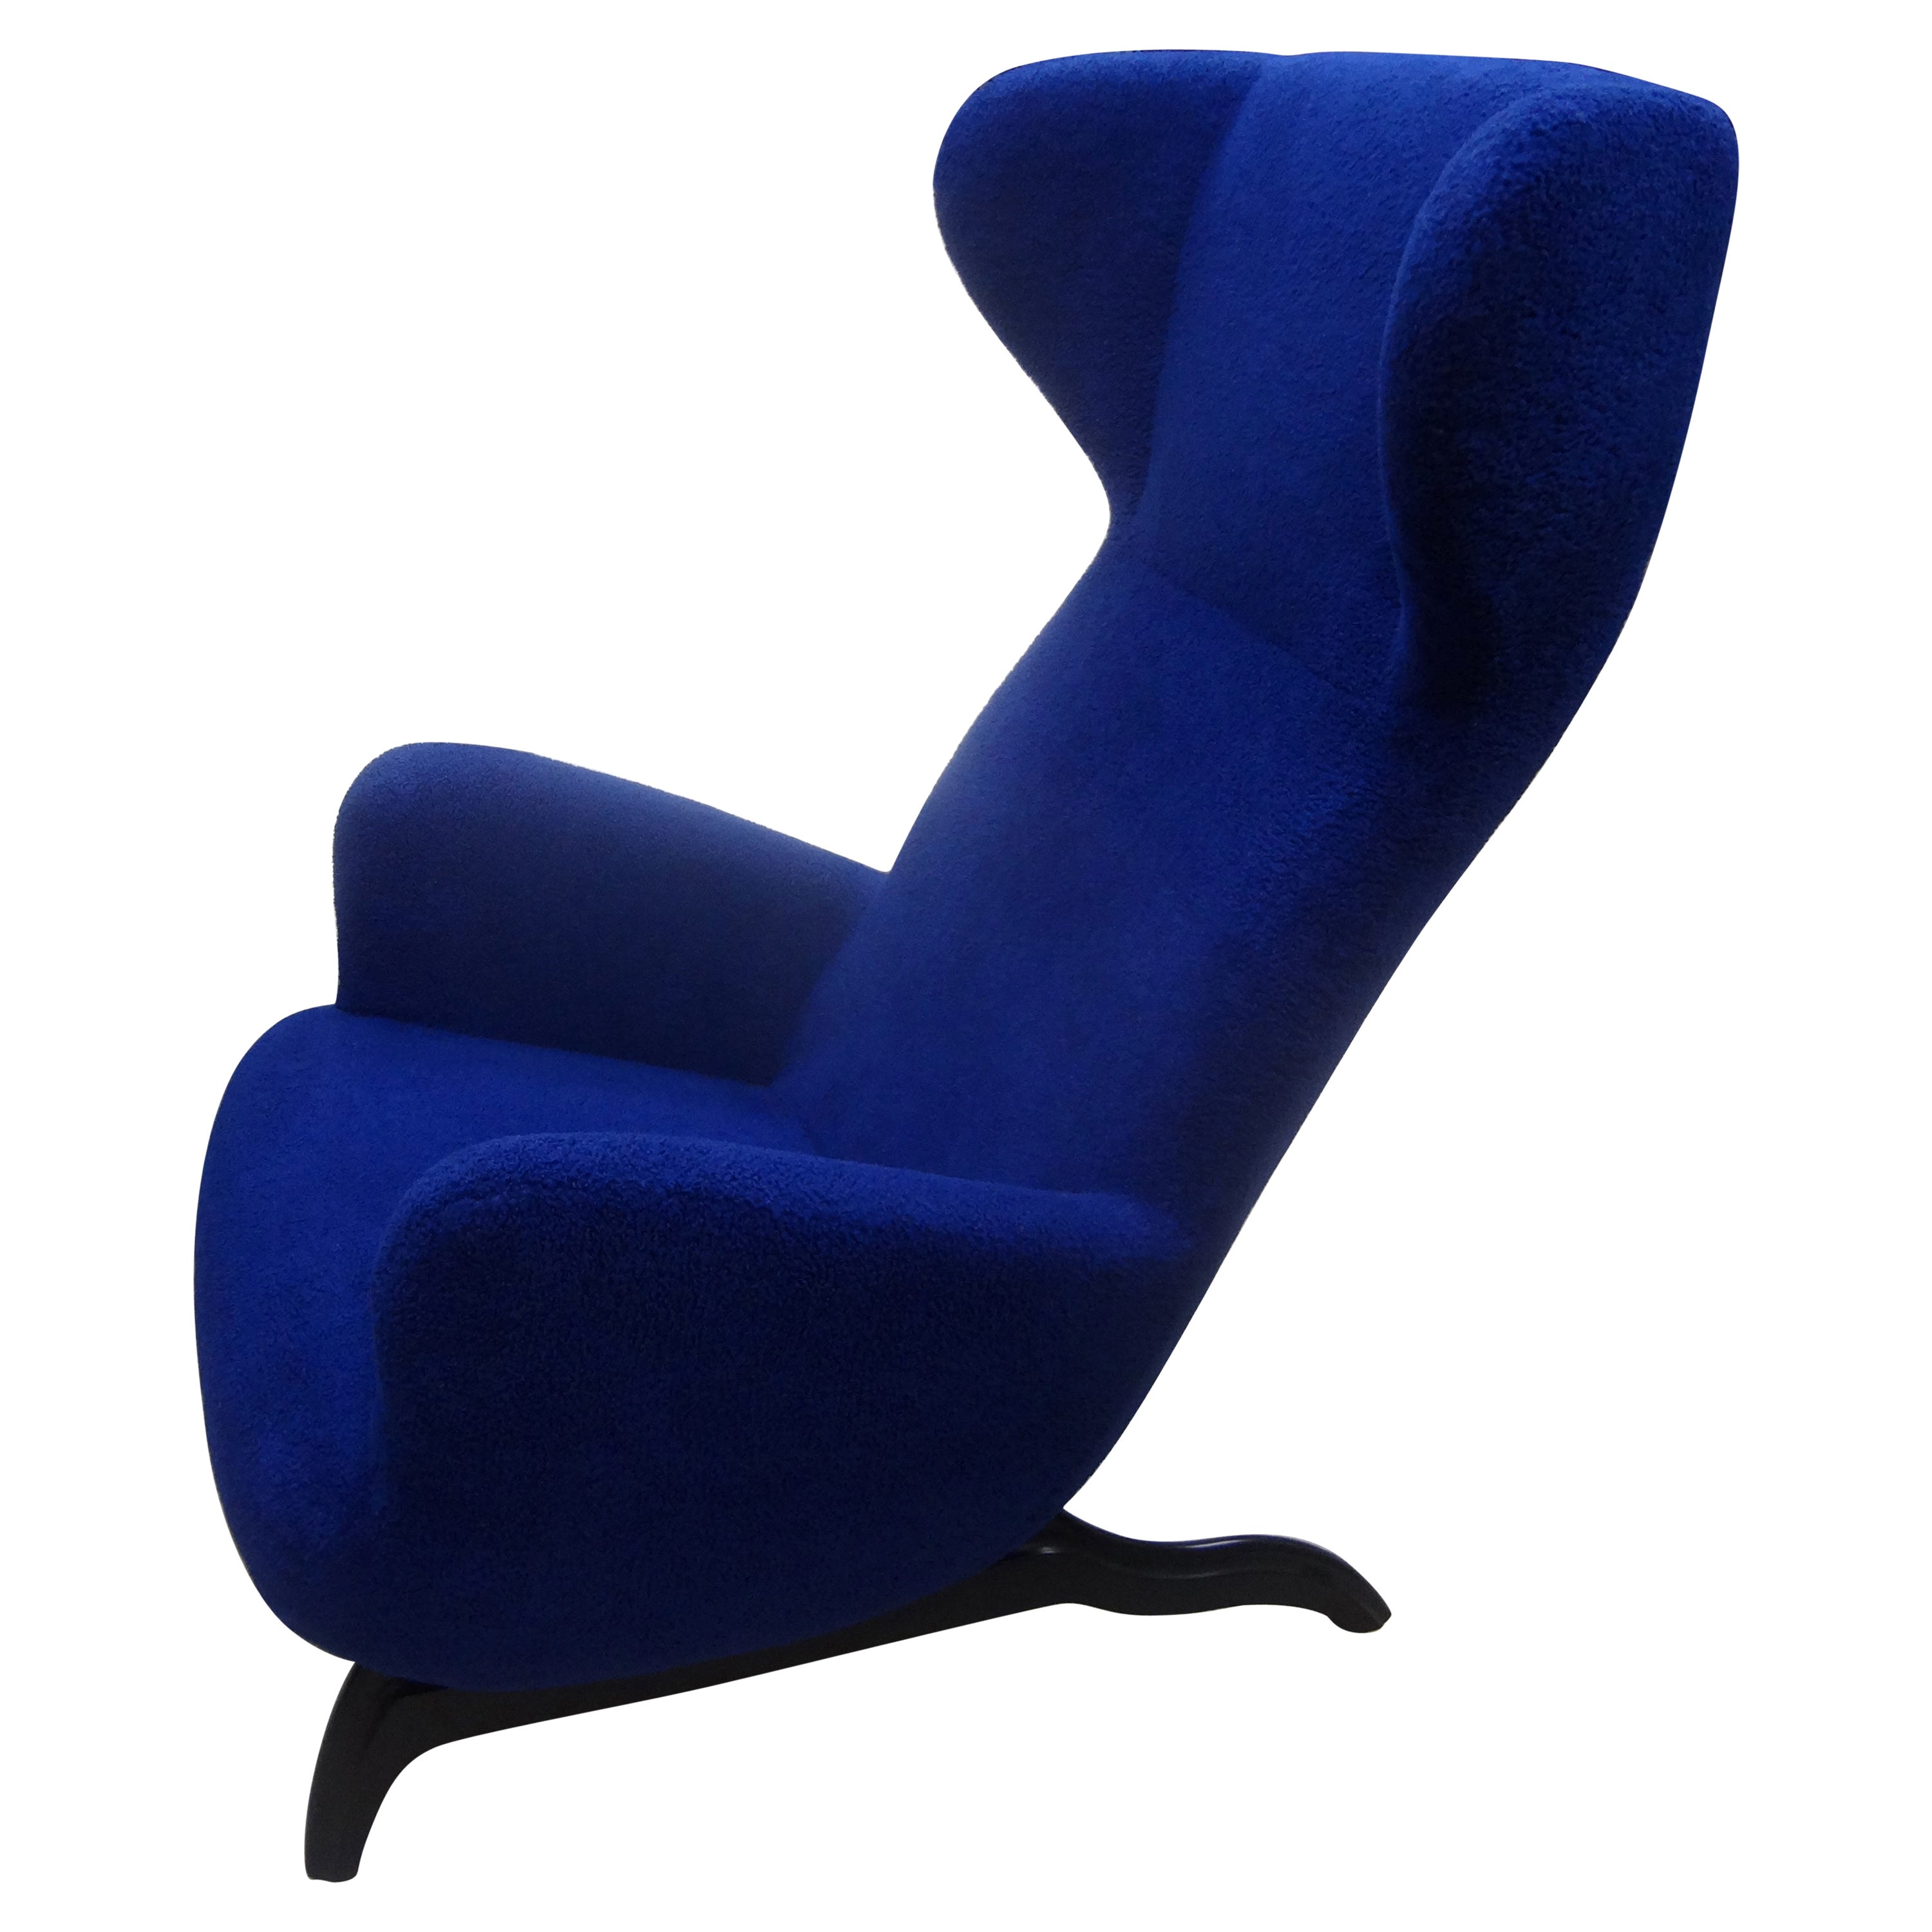 Italian Ardea Lounge Chair After A Design By Carlo Mollino  im Angebot